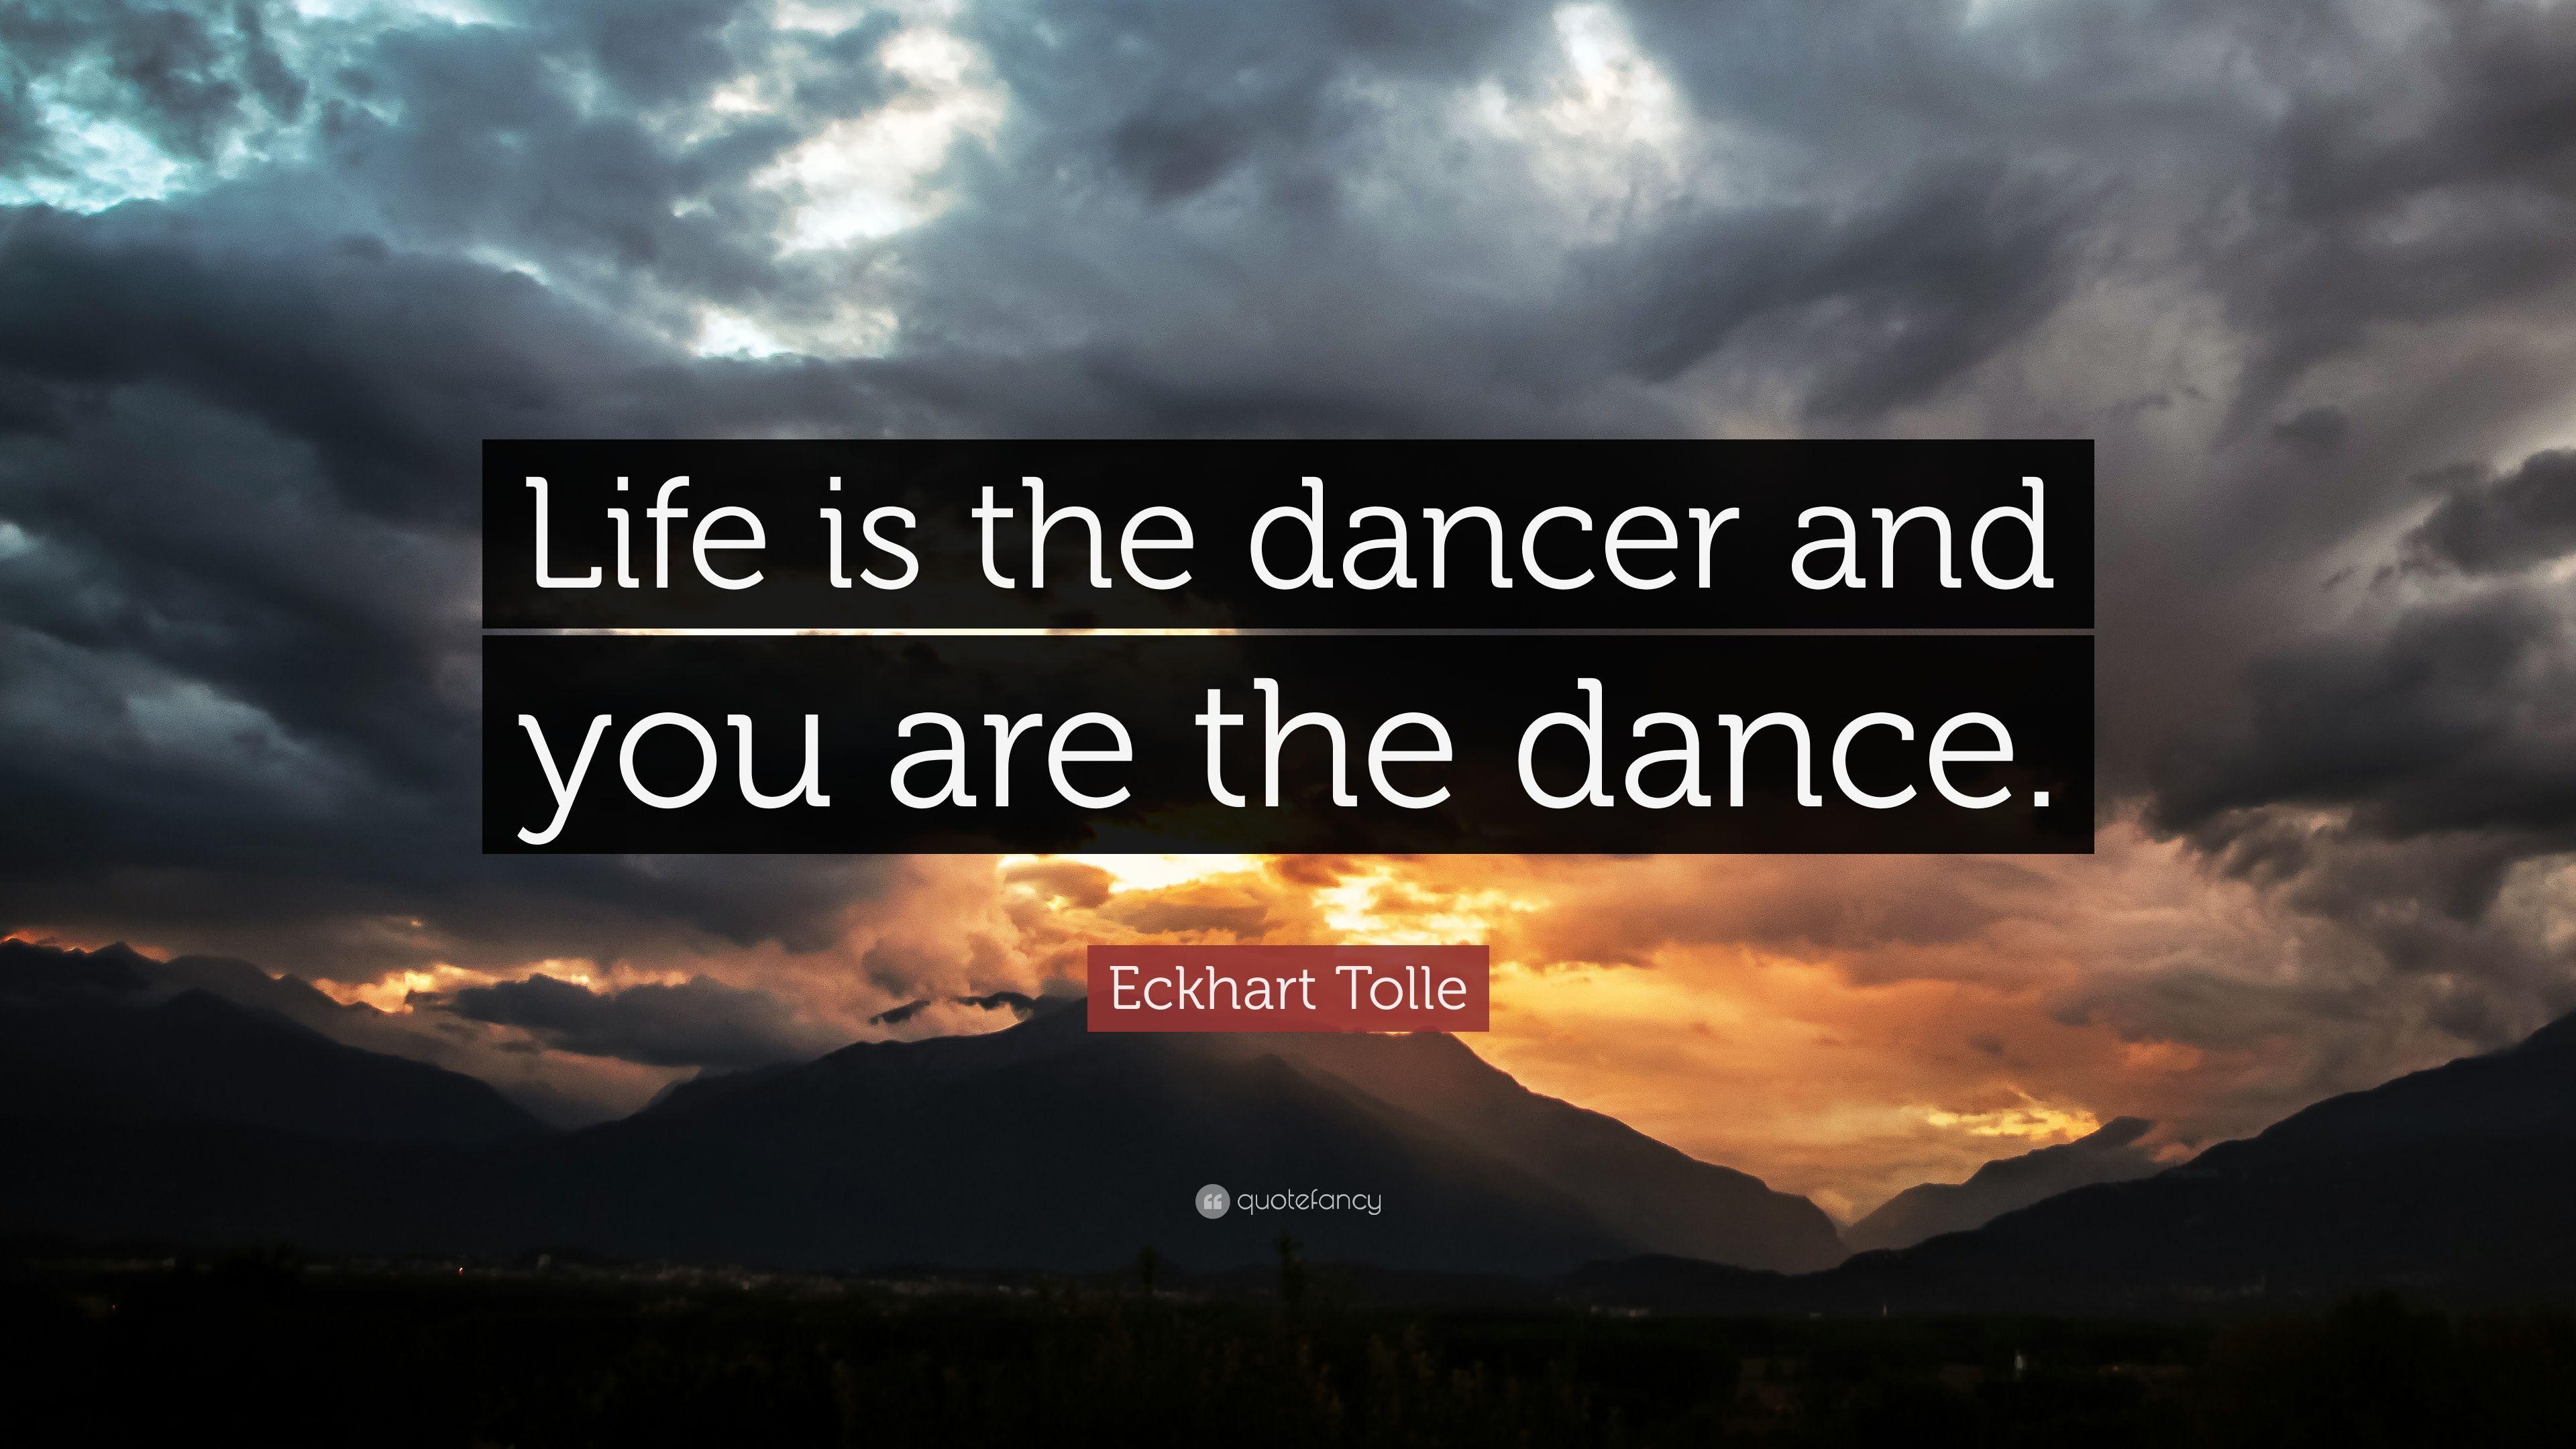 Eckhart Tolle Quote: “Life is the dancer and you are the dance